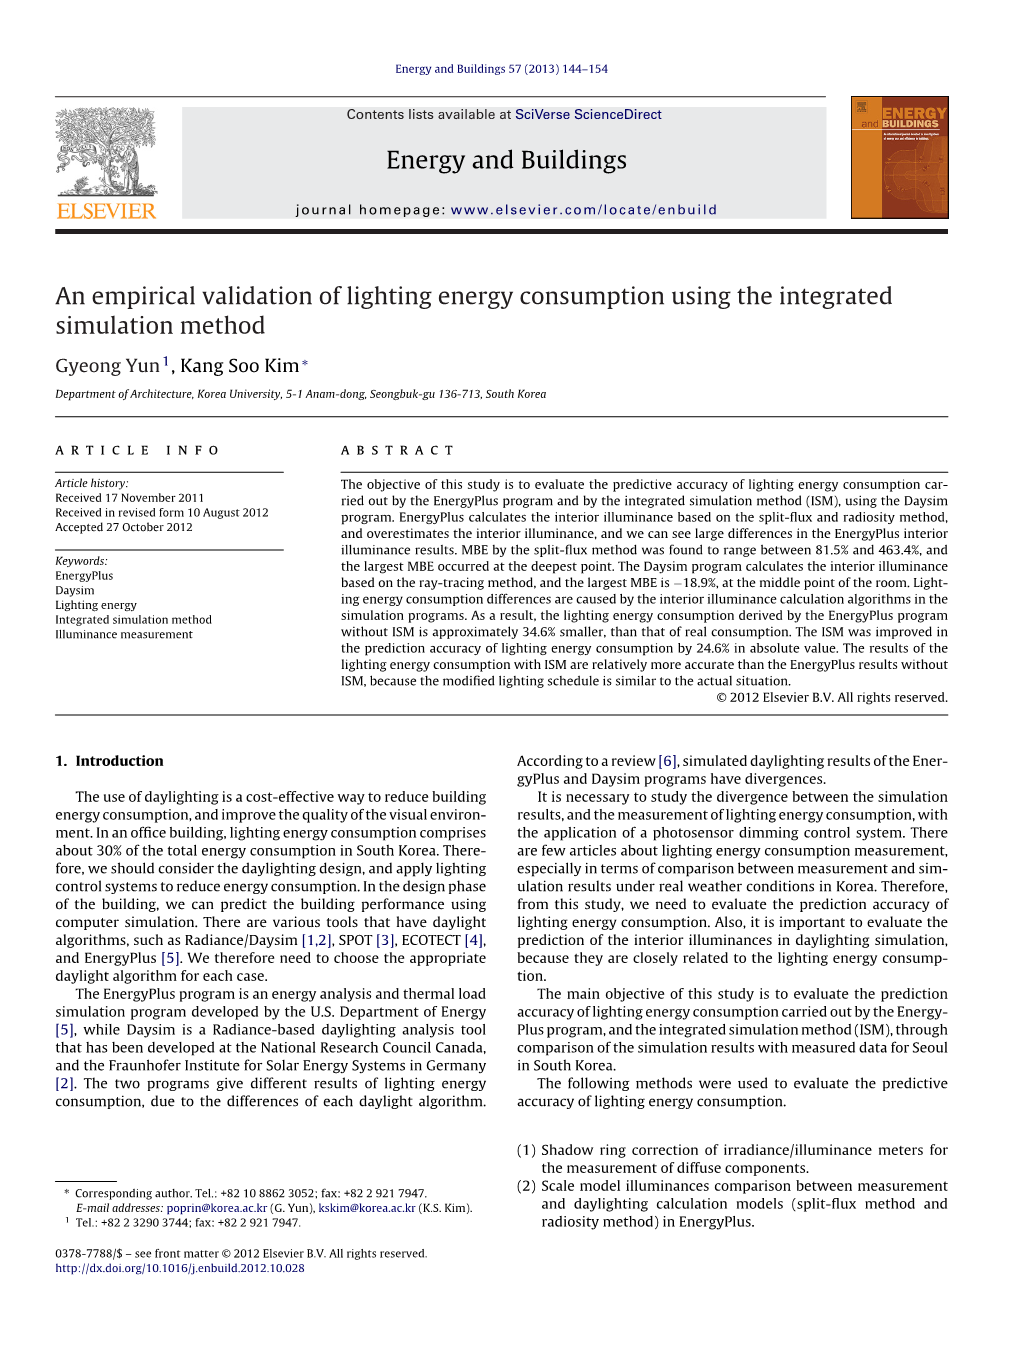 An Empirical Validation of Lighting Energy Consumption Using the Integrated